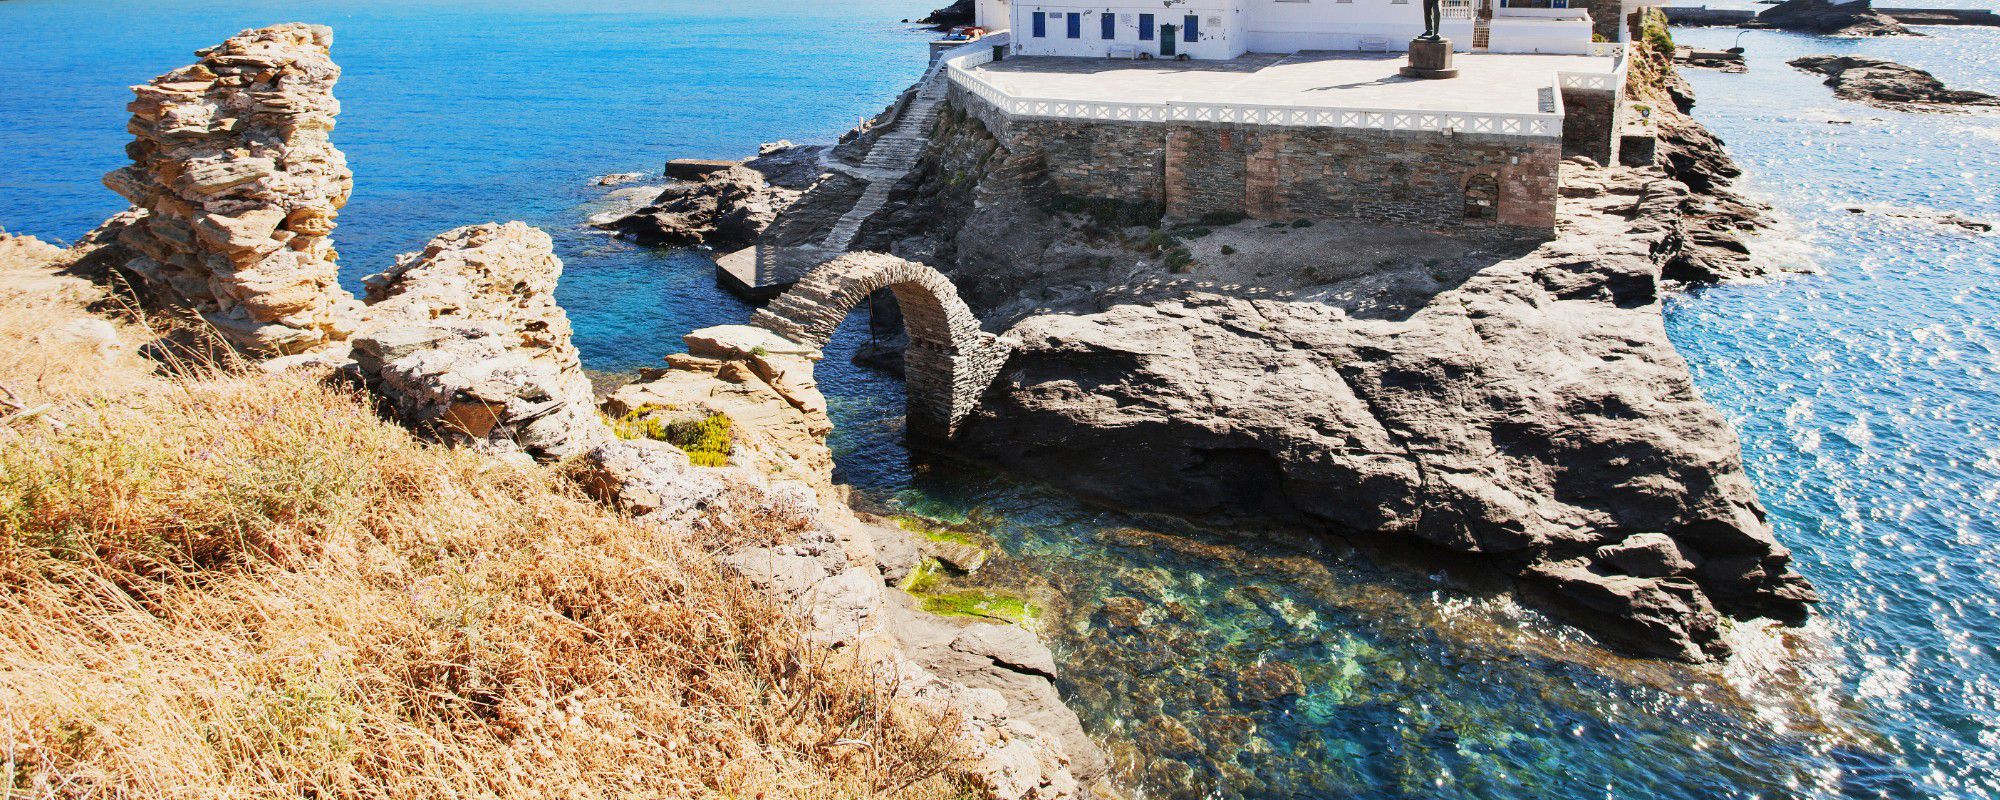 Enter the Magical World of Andros Island